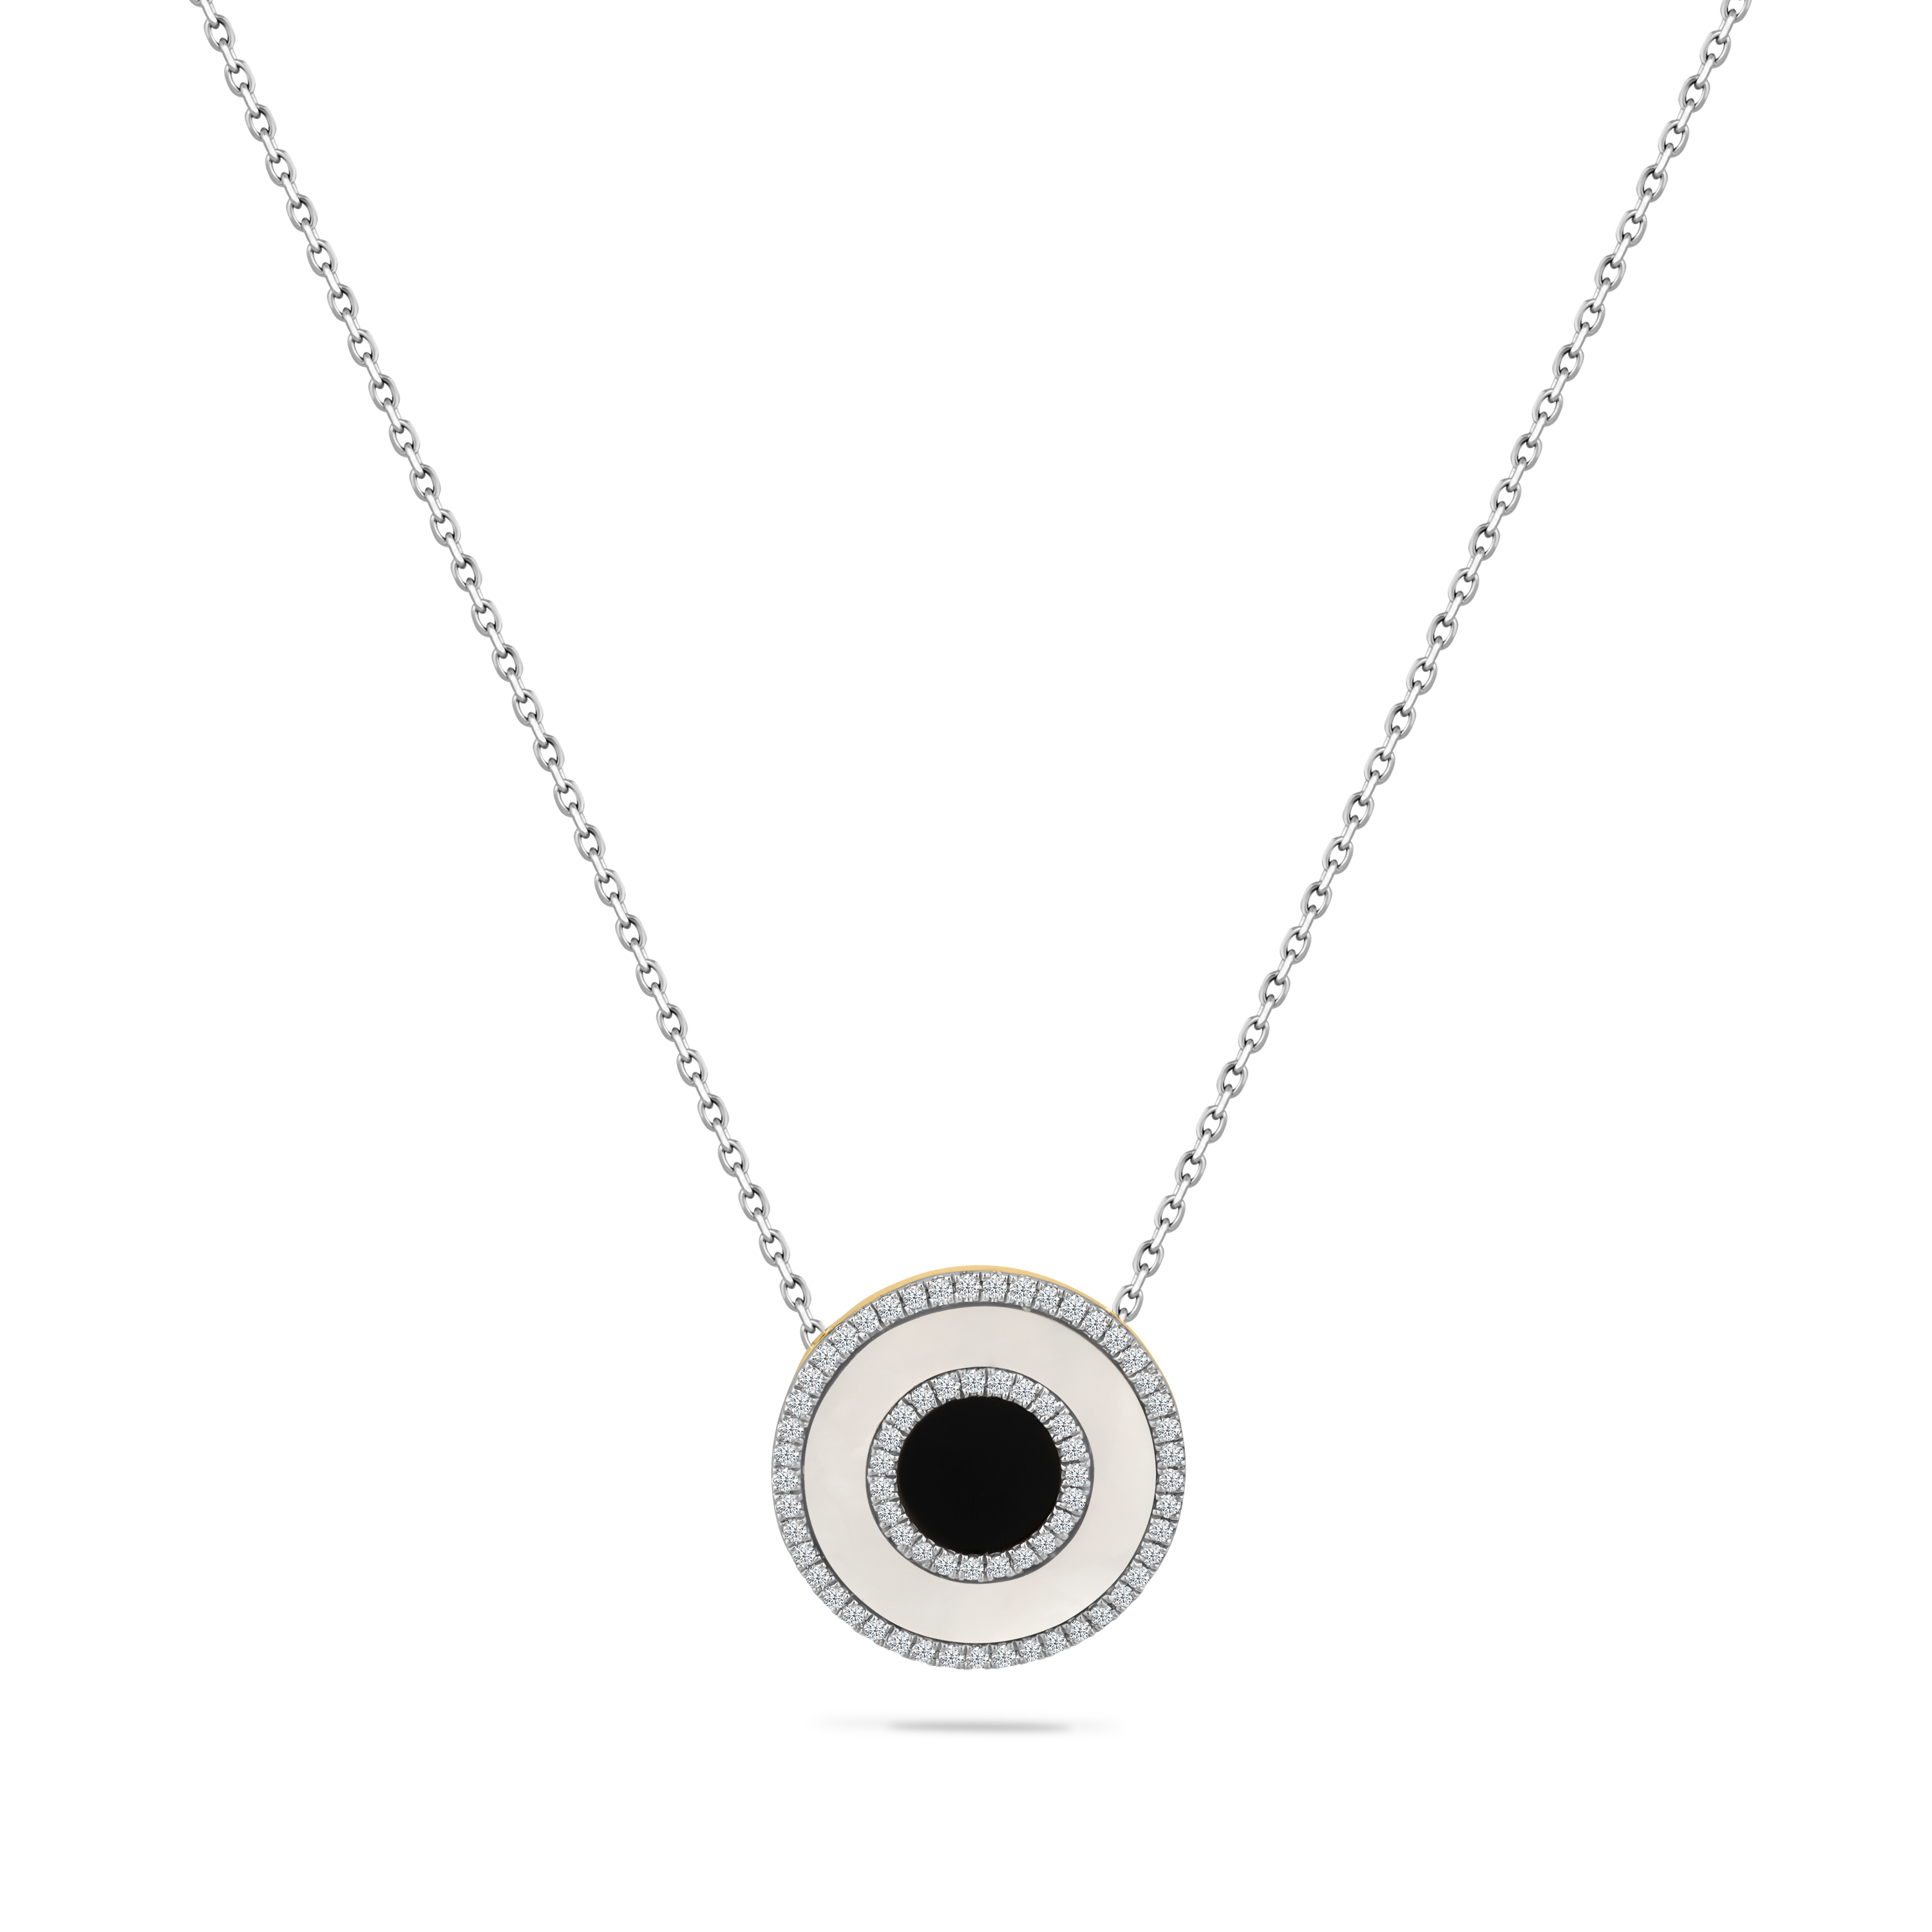 14K DISK PENDANT WITH MOTHER OF PEARL, BLACK ONYX  & 68 DIAMONDS 0.23CT ON 18 INCHES CABLE CHAIN